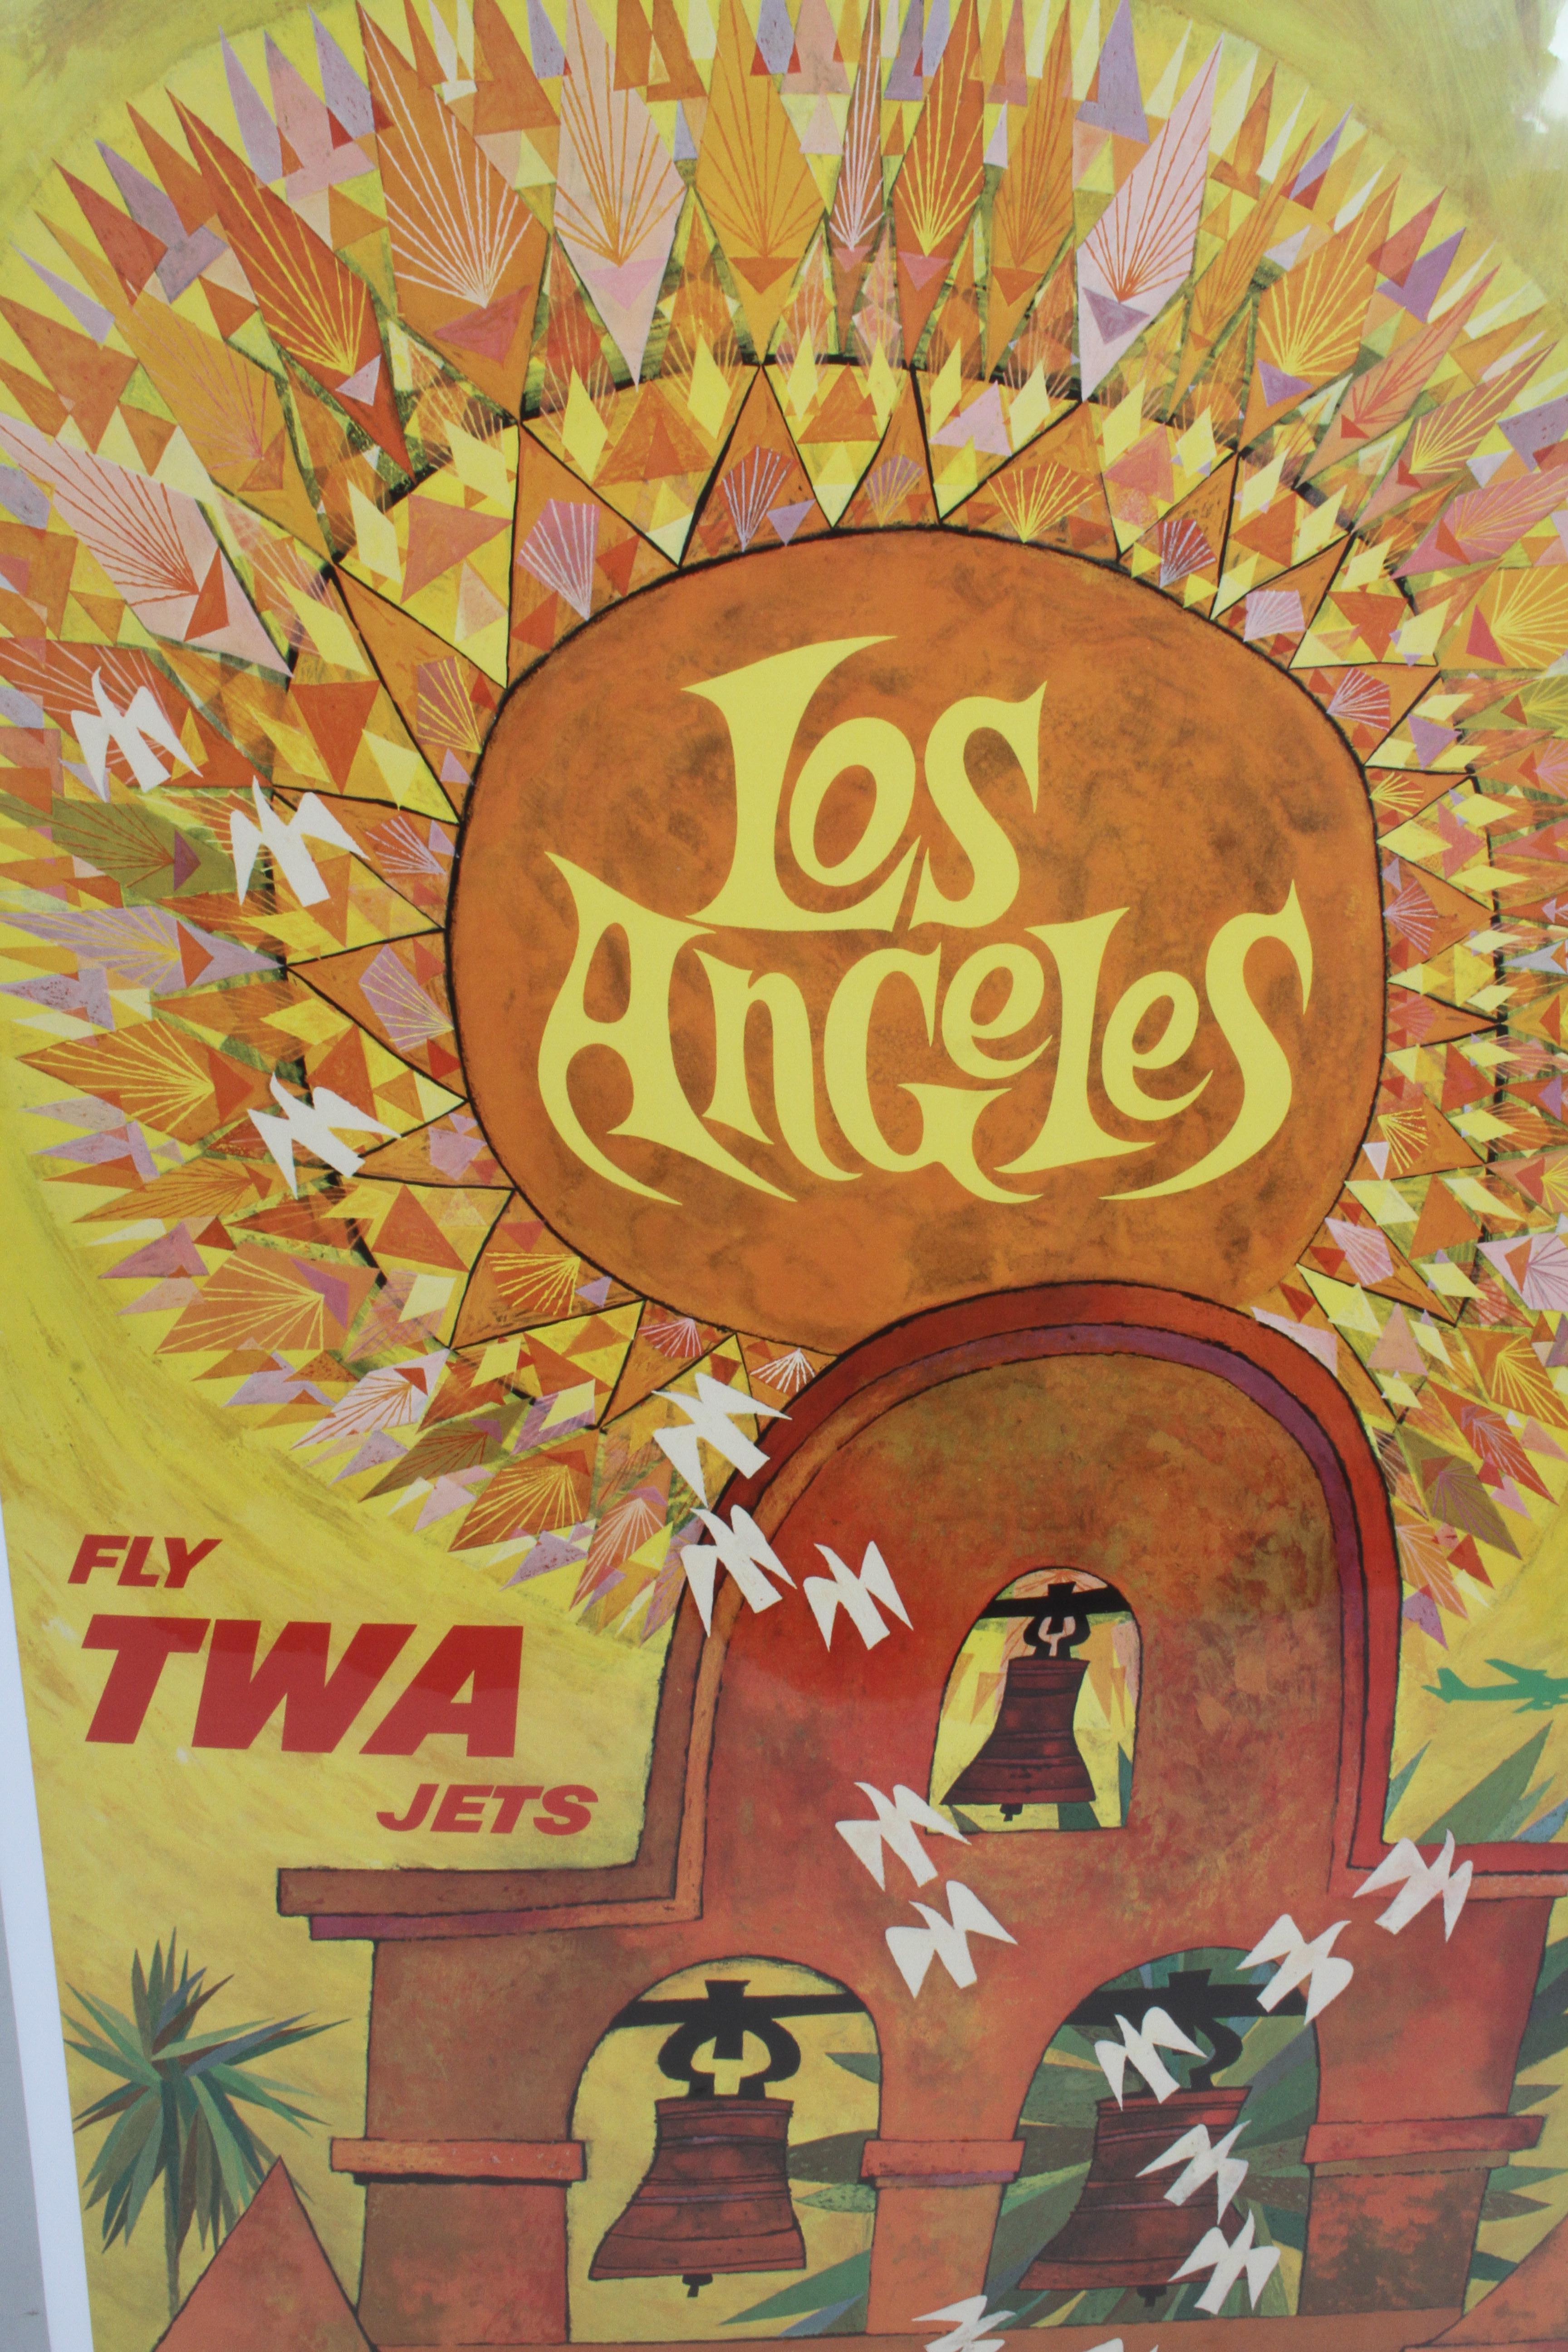 American Vintage Fly TWA Airlines to Los Angles Poster by Artist David Klein, circa 1960s For Sale